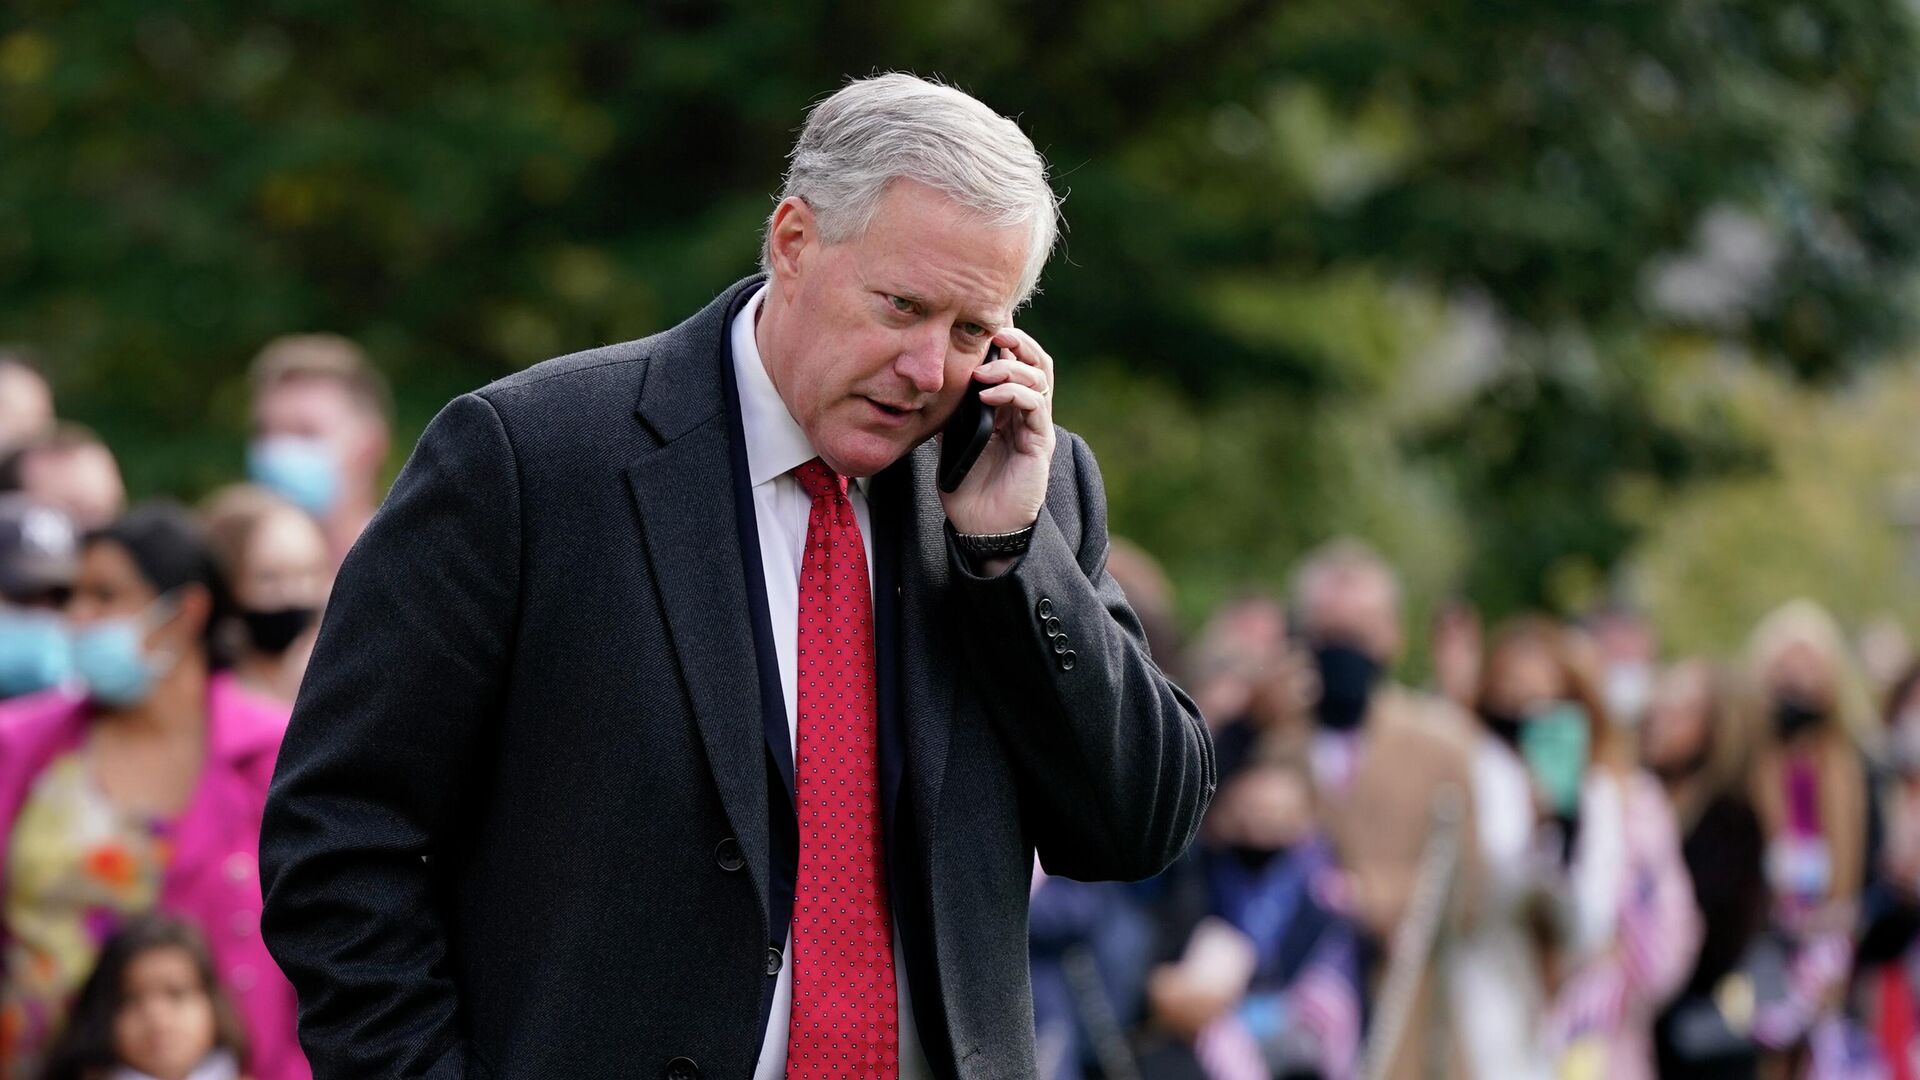 White House chief of staff Mark Meadows speaks on a phone on the South Lawn of the White House in Washington, on Oct. 30, 2020. The House committee investigating the Jan. 6 Capitol insurrection has issued almost three dozen subpoenas as it aggressively seeks information about the origins of the attack and what former President Donald Trump did — or didn’t do — to stop it. The panel is exploring several paths simultaneously. - Sputnik International, 1920, 23.04.2022